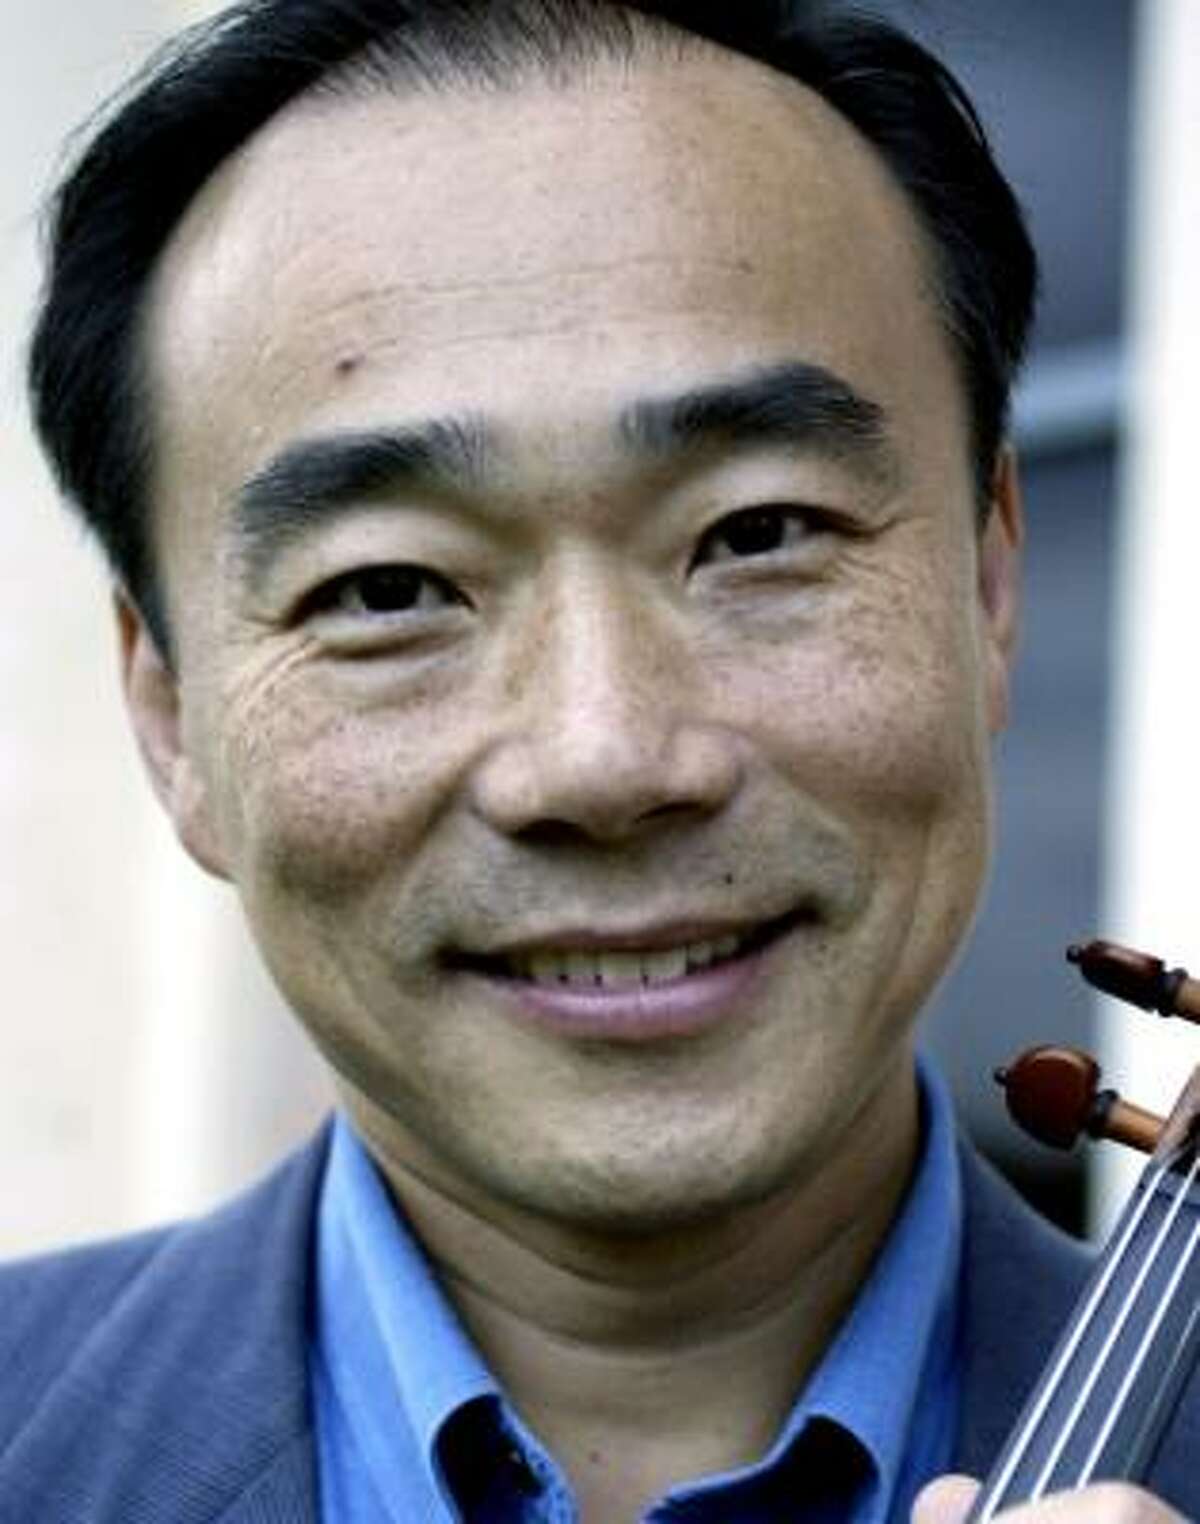 Violinist Cho-Liang Lin, an internationally acclaimed performer who has recently joined the faculty of Rice University's Shepherd School of Music, poses for a photograph on Friday, September 29, 2006 outside the Alice Ptratt Brown Hall. (Jessica Kourkounis/For The Chronicle)